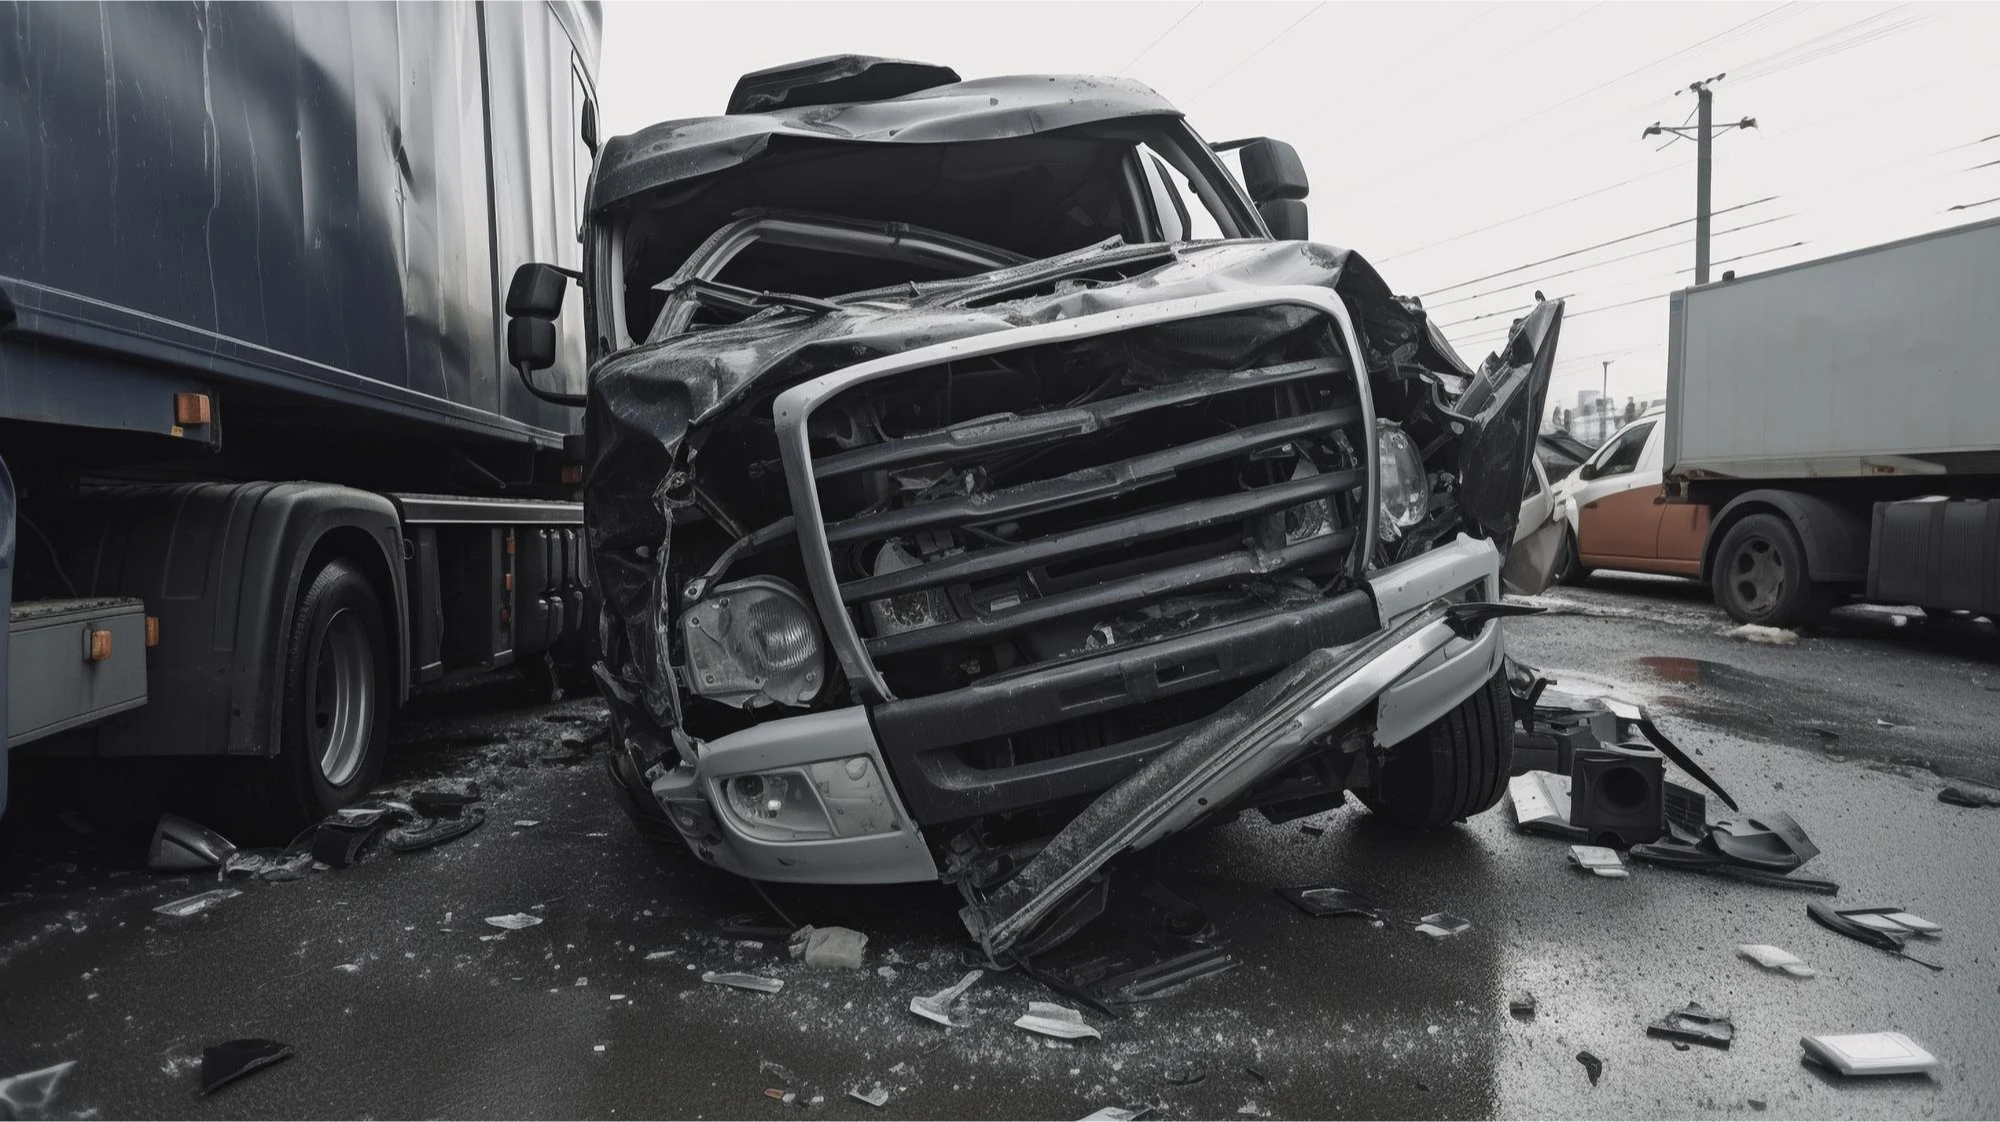 Injured By an 18-Wheeler: Steps to Take Immediately After the Accident